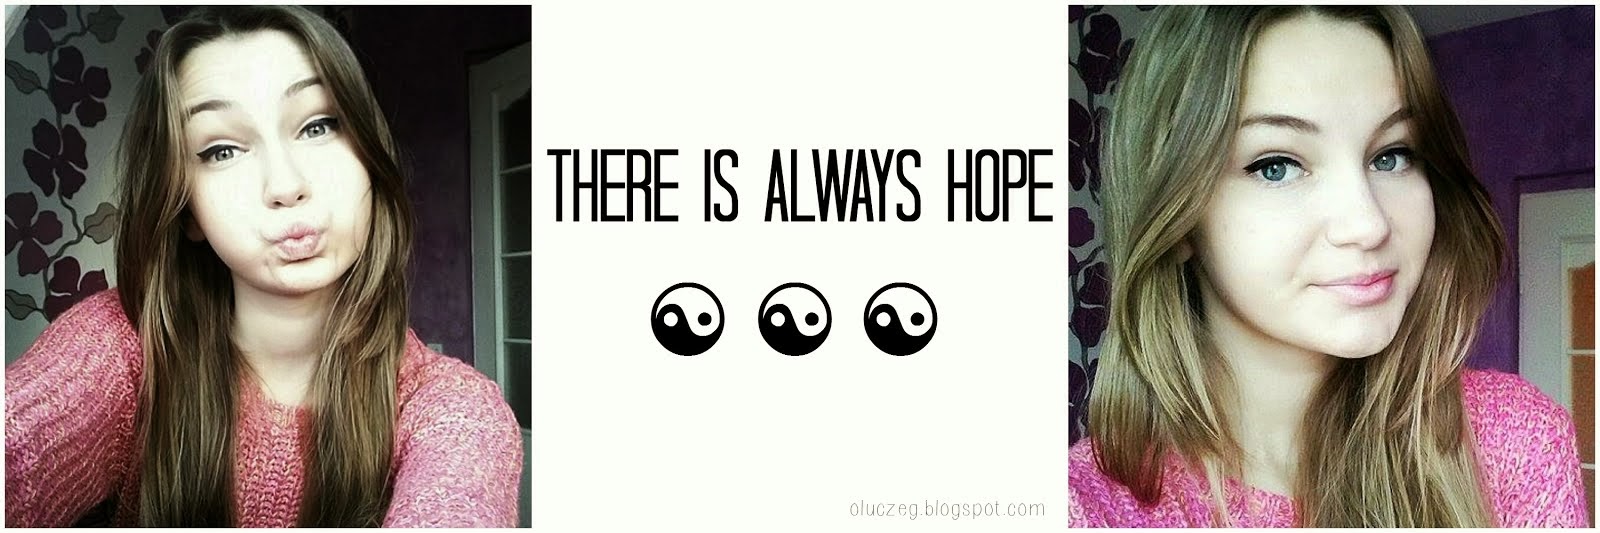                THERE IS ALWAYS HOPE